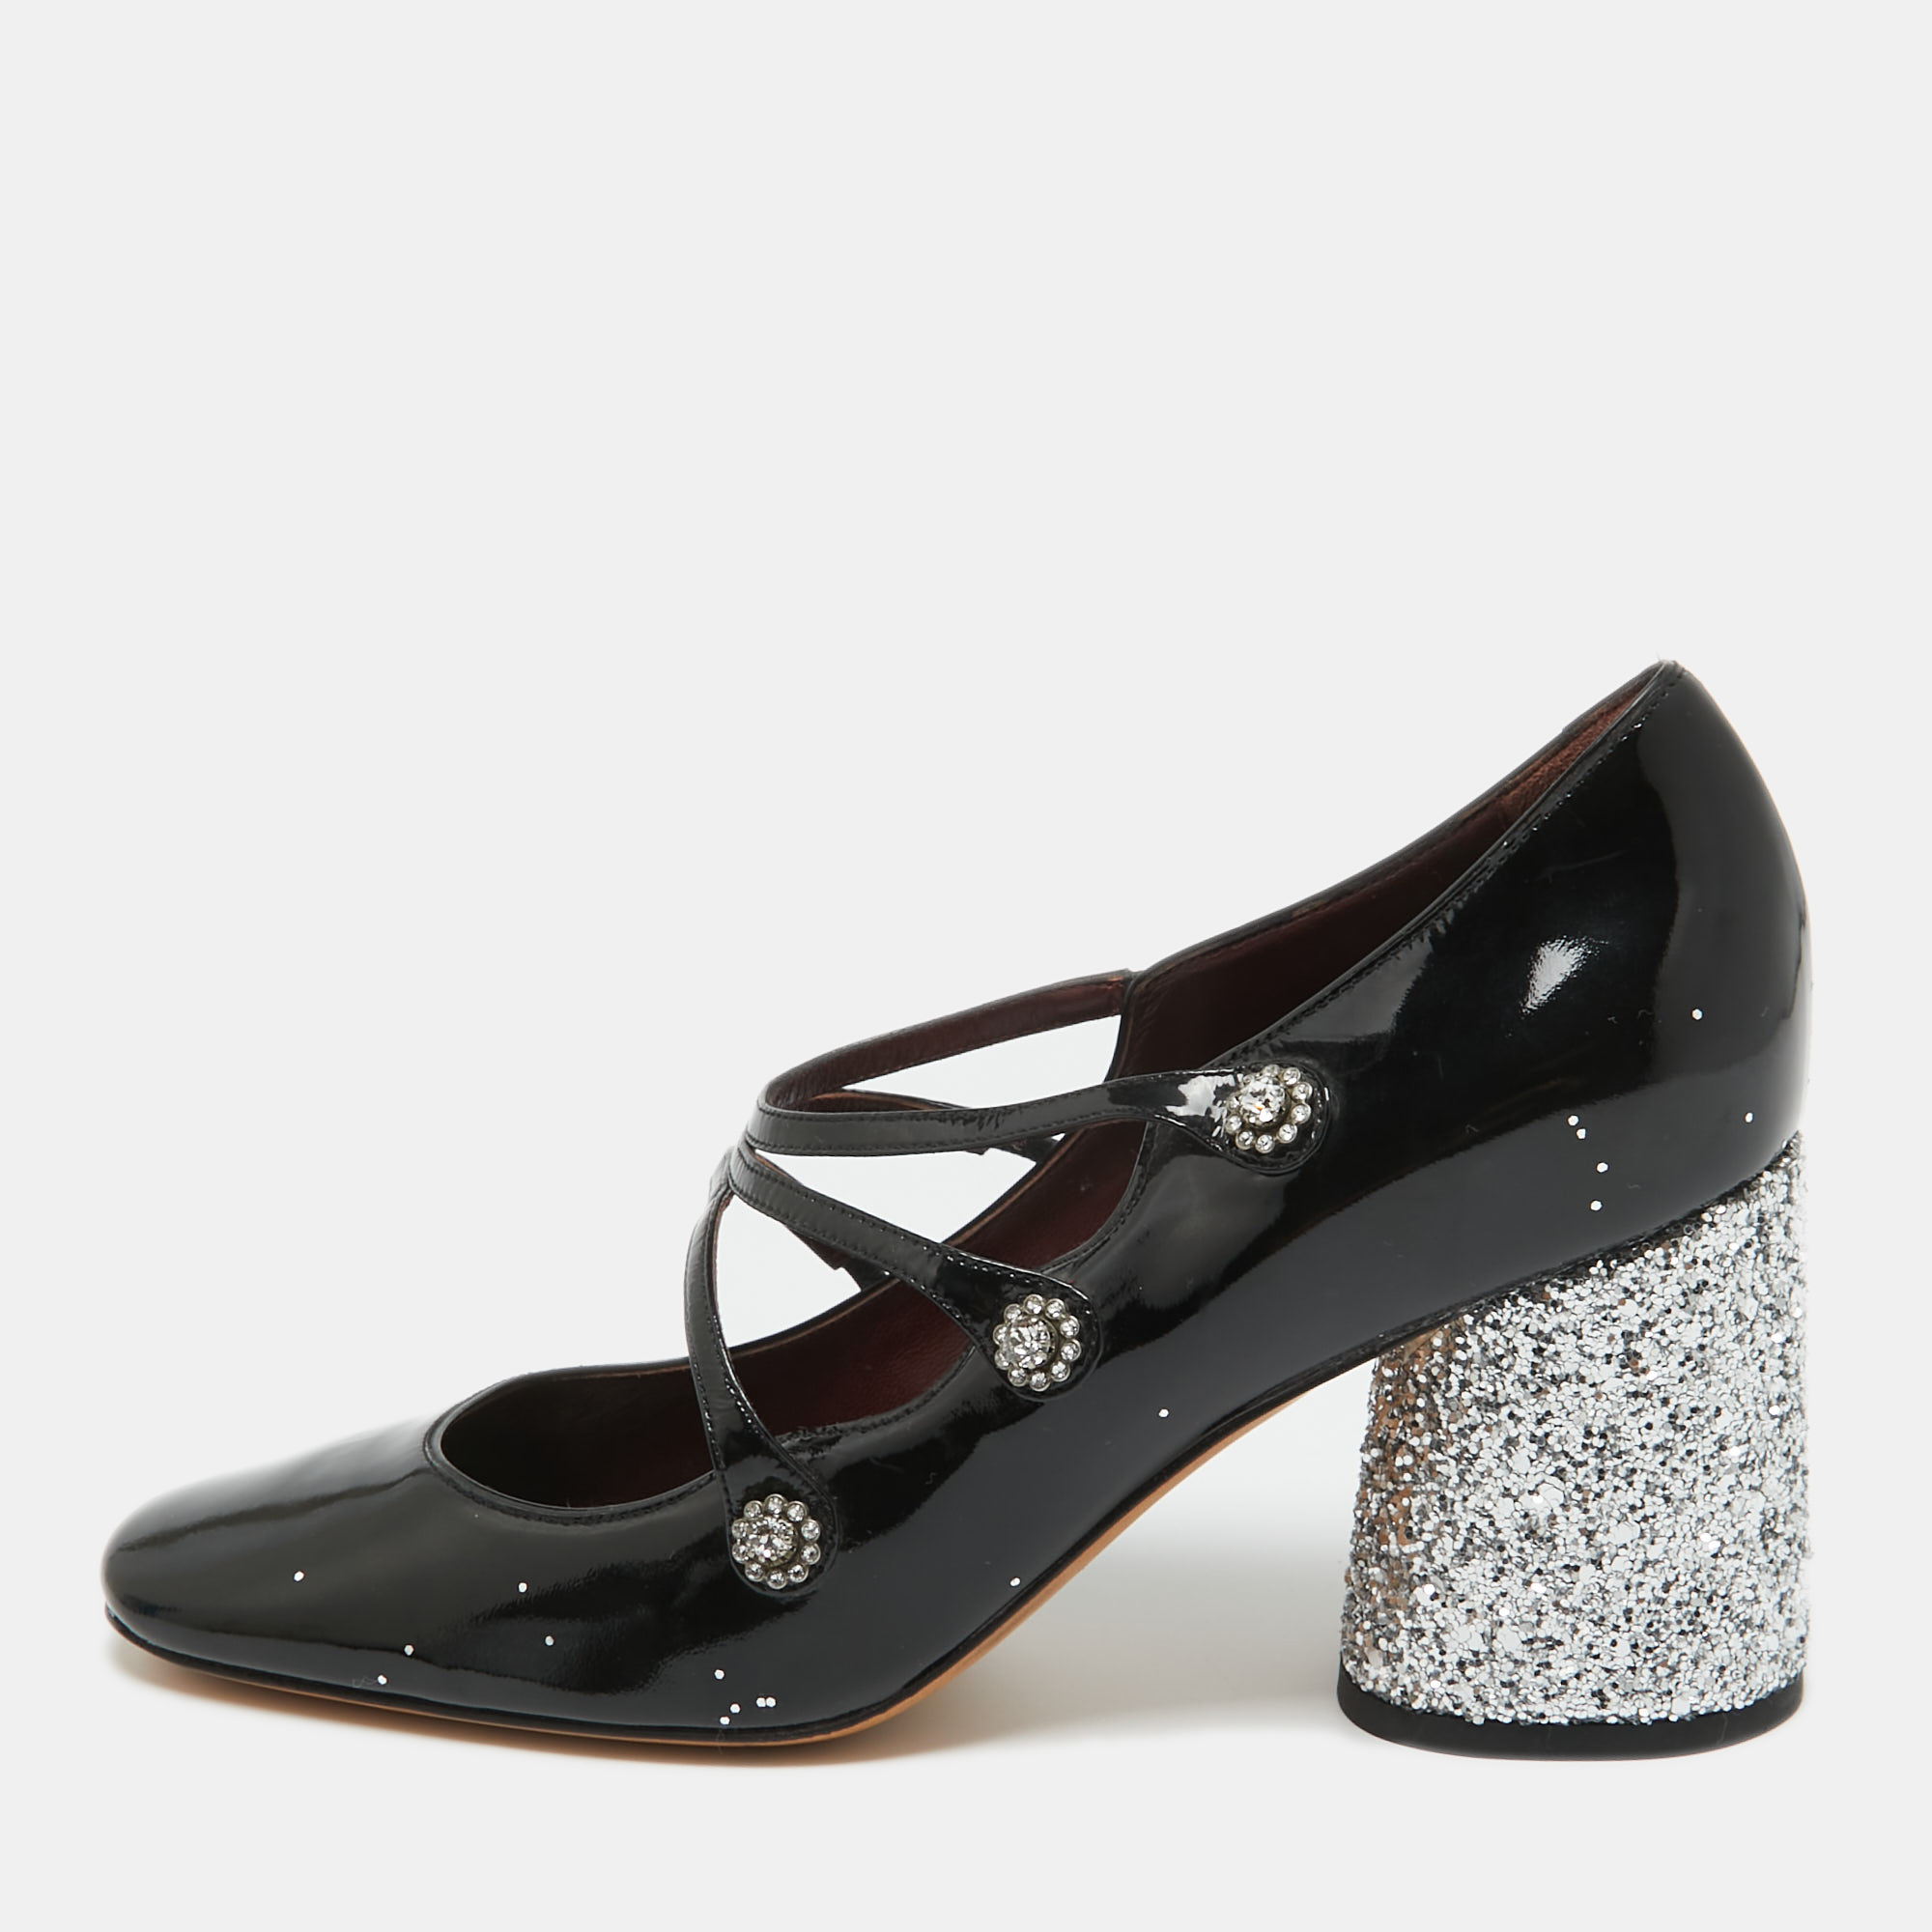 Complete a look with a touch of flitter in this pair of patent leather pumps. Ideal with dresses and suits these Marc by Marc Jacobs pumps that are designed in a black shade are comfortable and stylish.